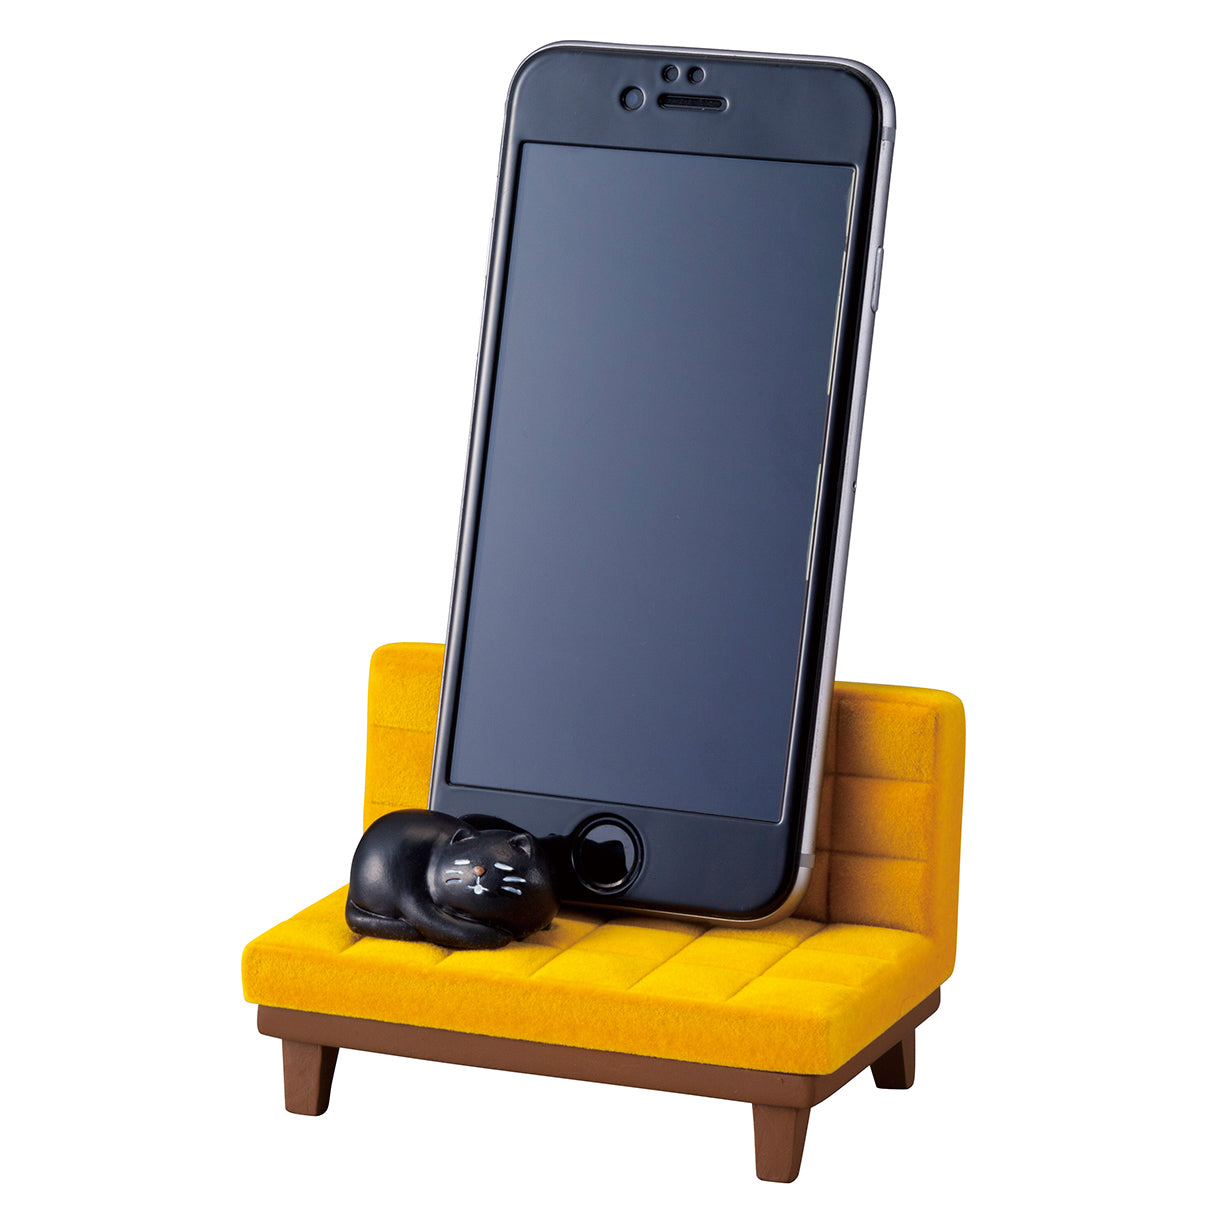 Decole Concombre Cat Smartphone Stand - Yellow